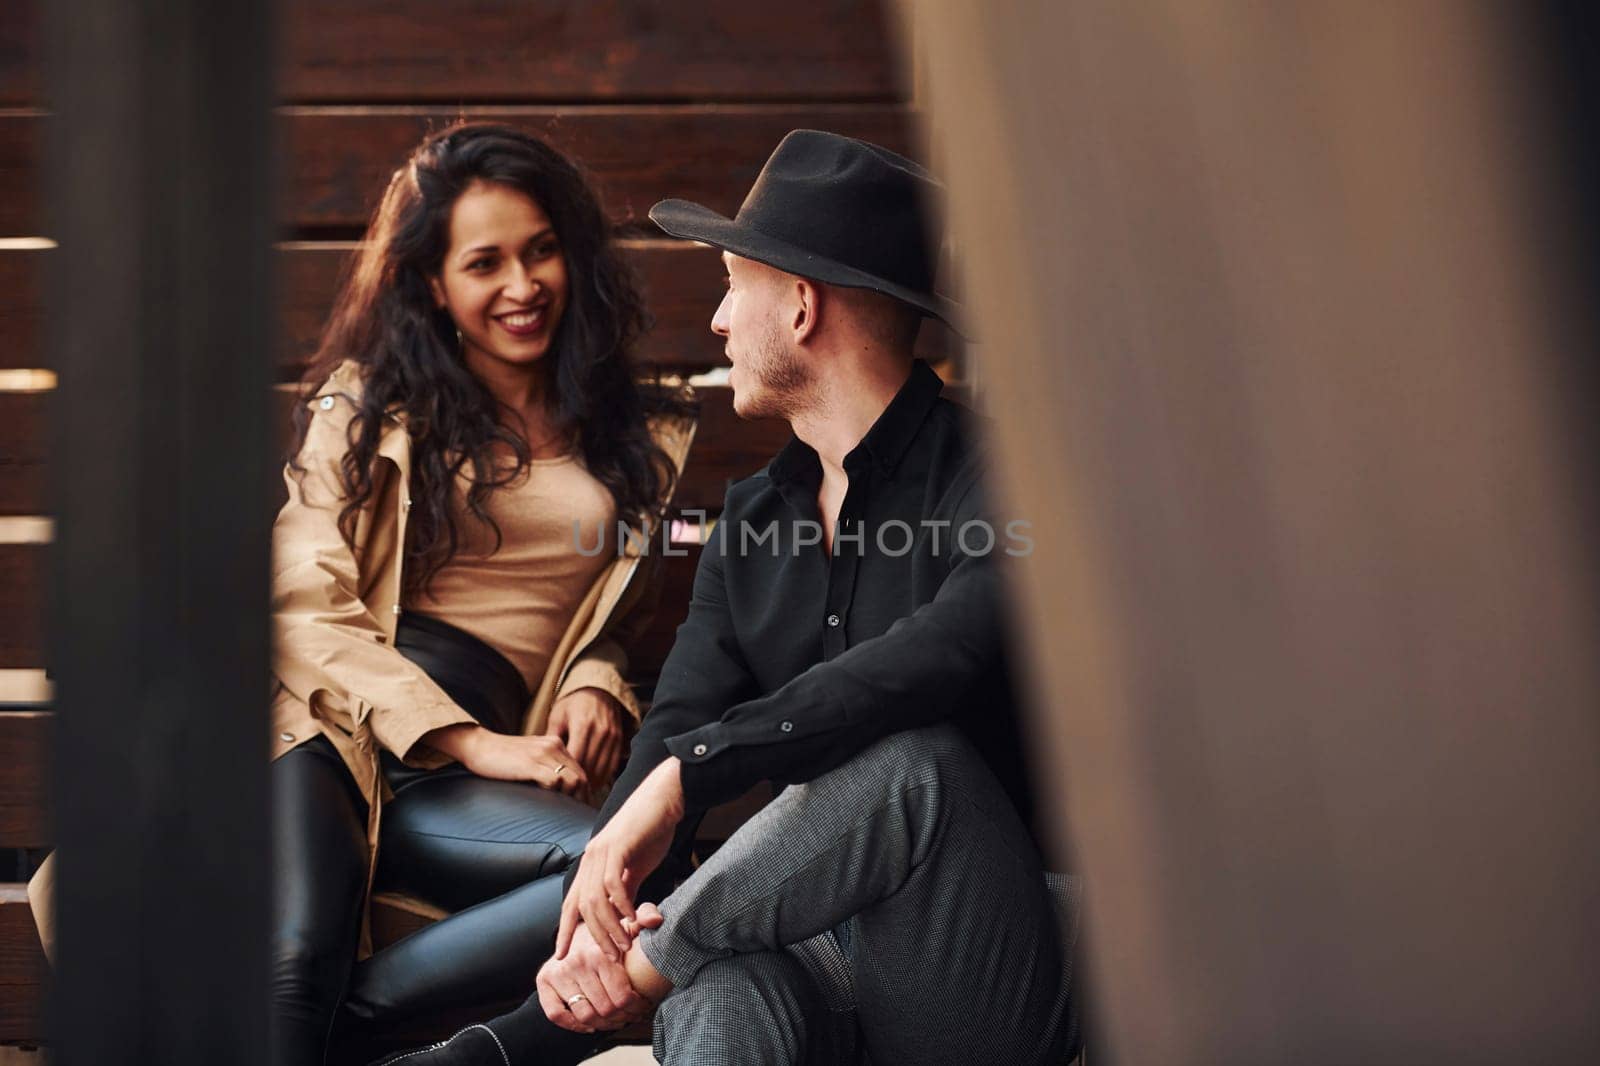 Cheerful brunette in black leggings sitting on wooden stairs with her man in hat.